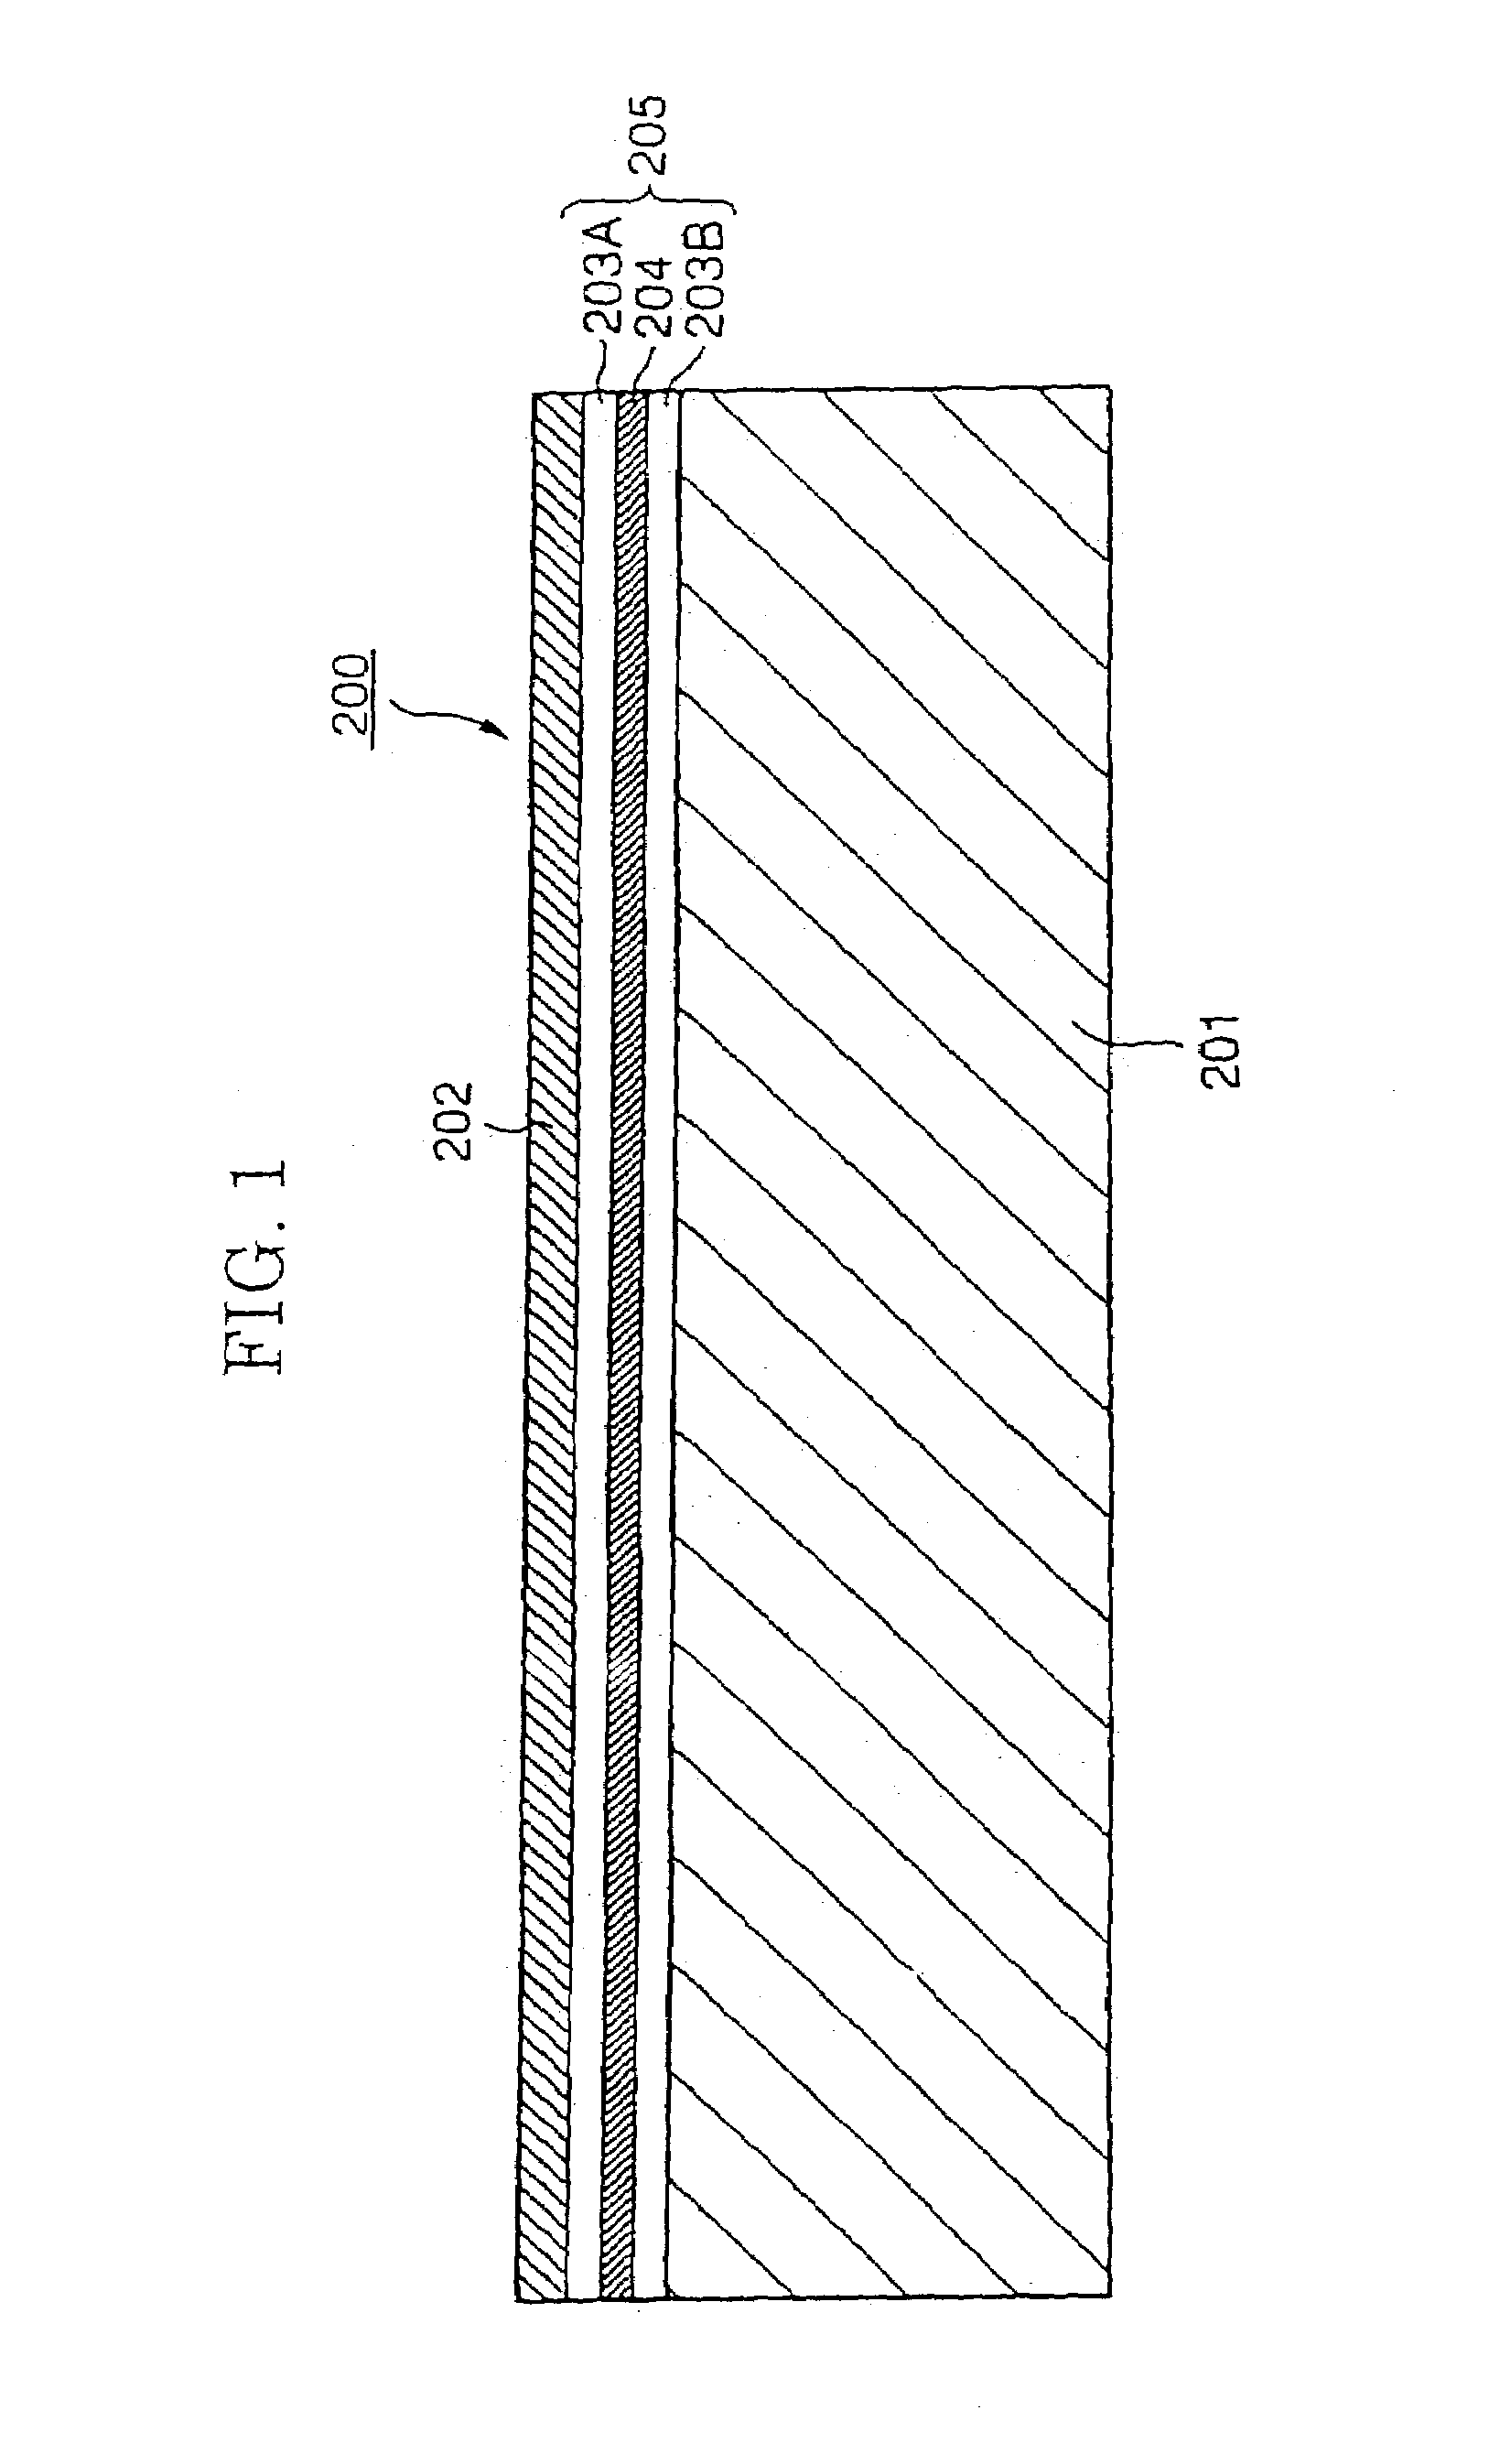 SOI substrate, element substrate, semiconductor device, electro-optical apparatus, electronic equipment, method of manufacturing the SOI substrate, method of manufacturing the element substrate, and method of manufacturing the electro-optical apparatus